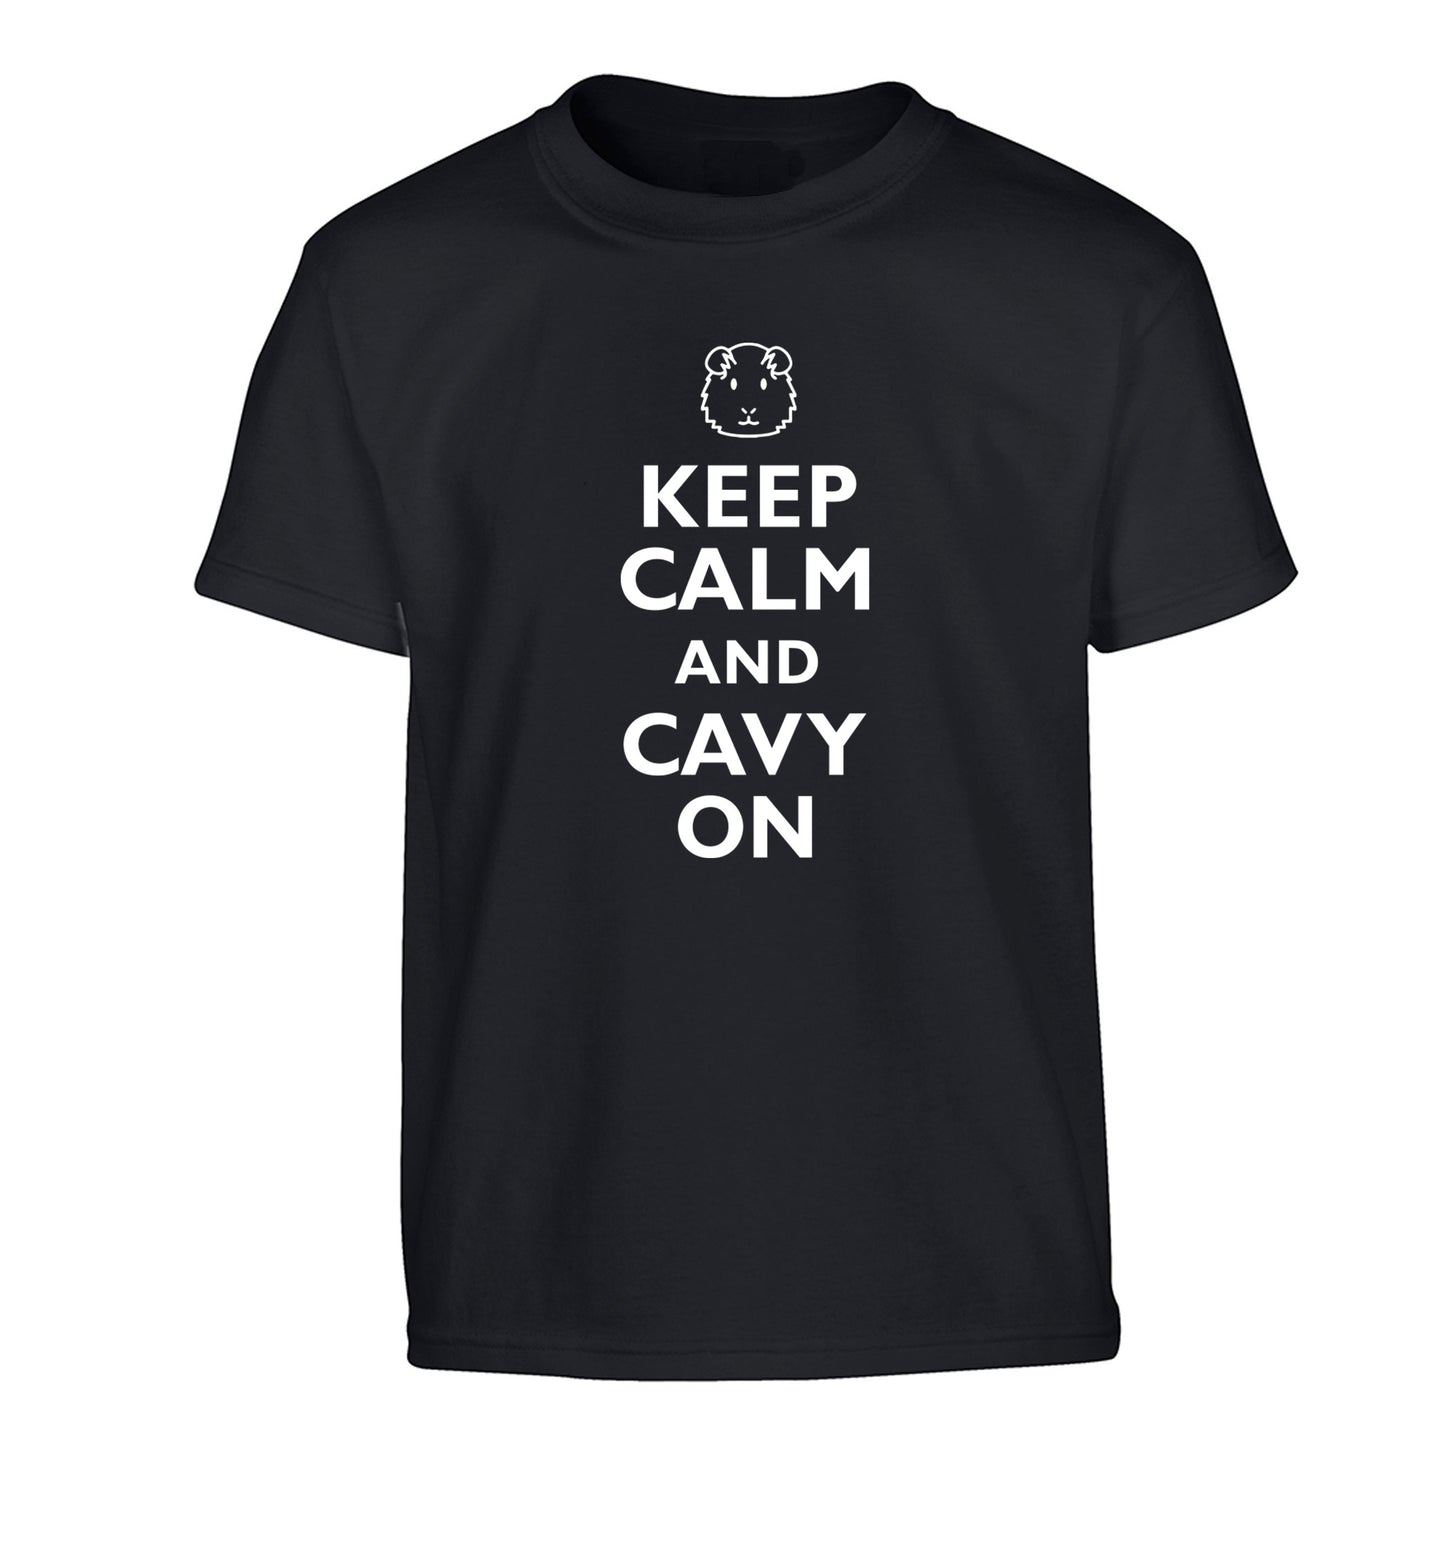 Keep calm and cavvy on Children's black Tshirt 12-14 Years